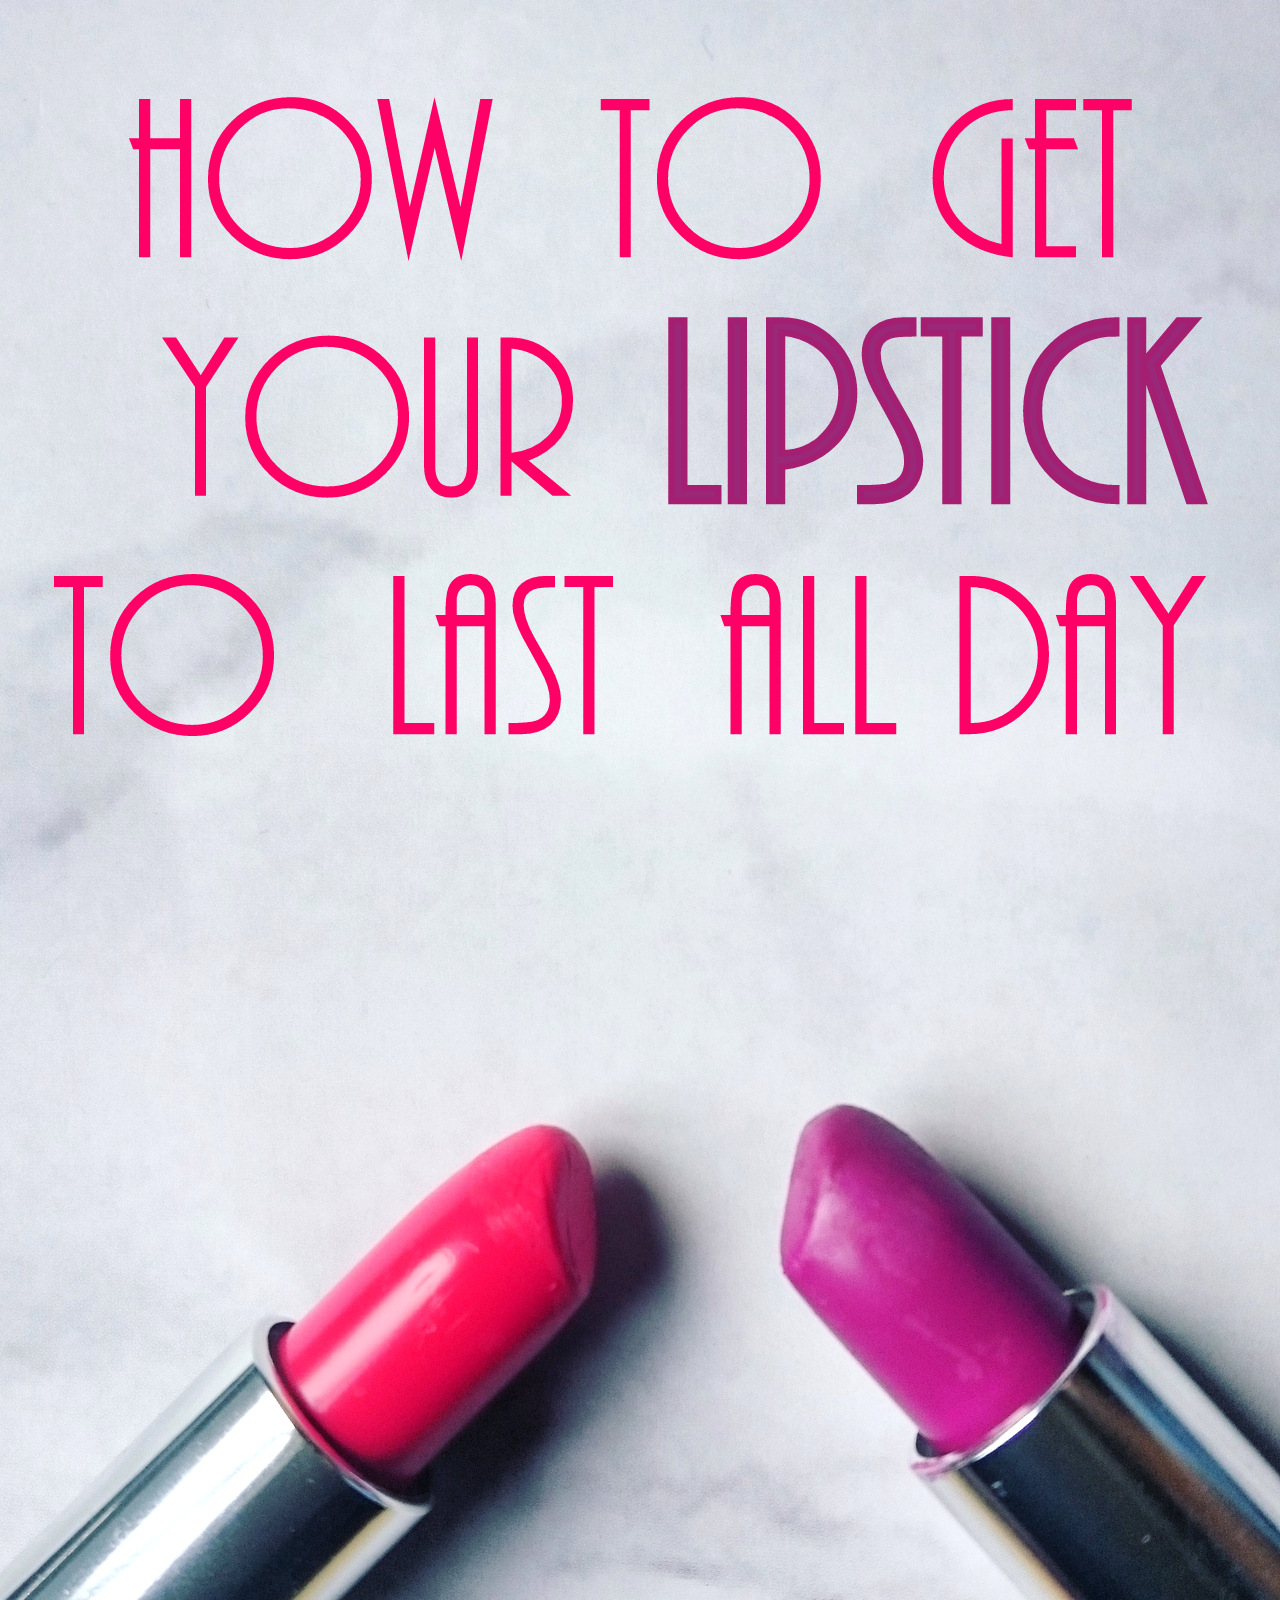 How To Get Your Lipstick Lasting All Day